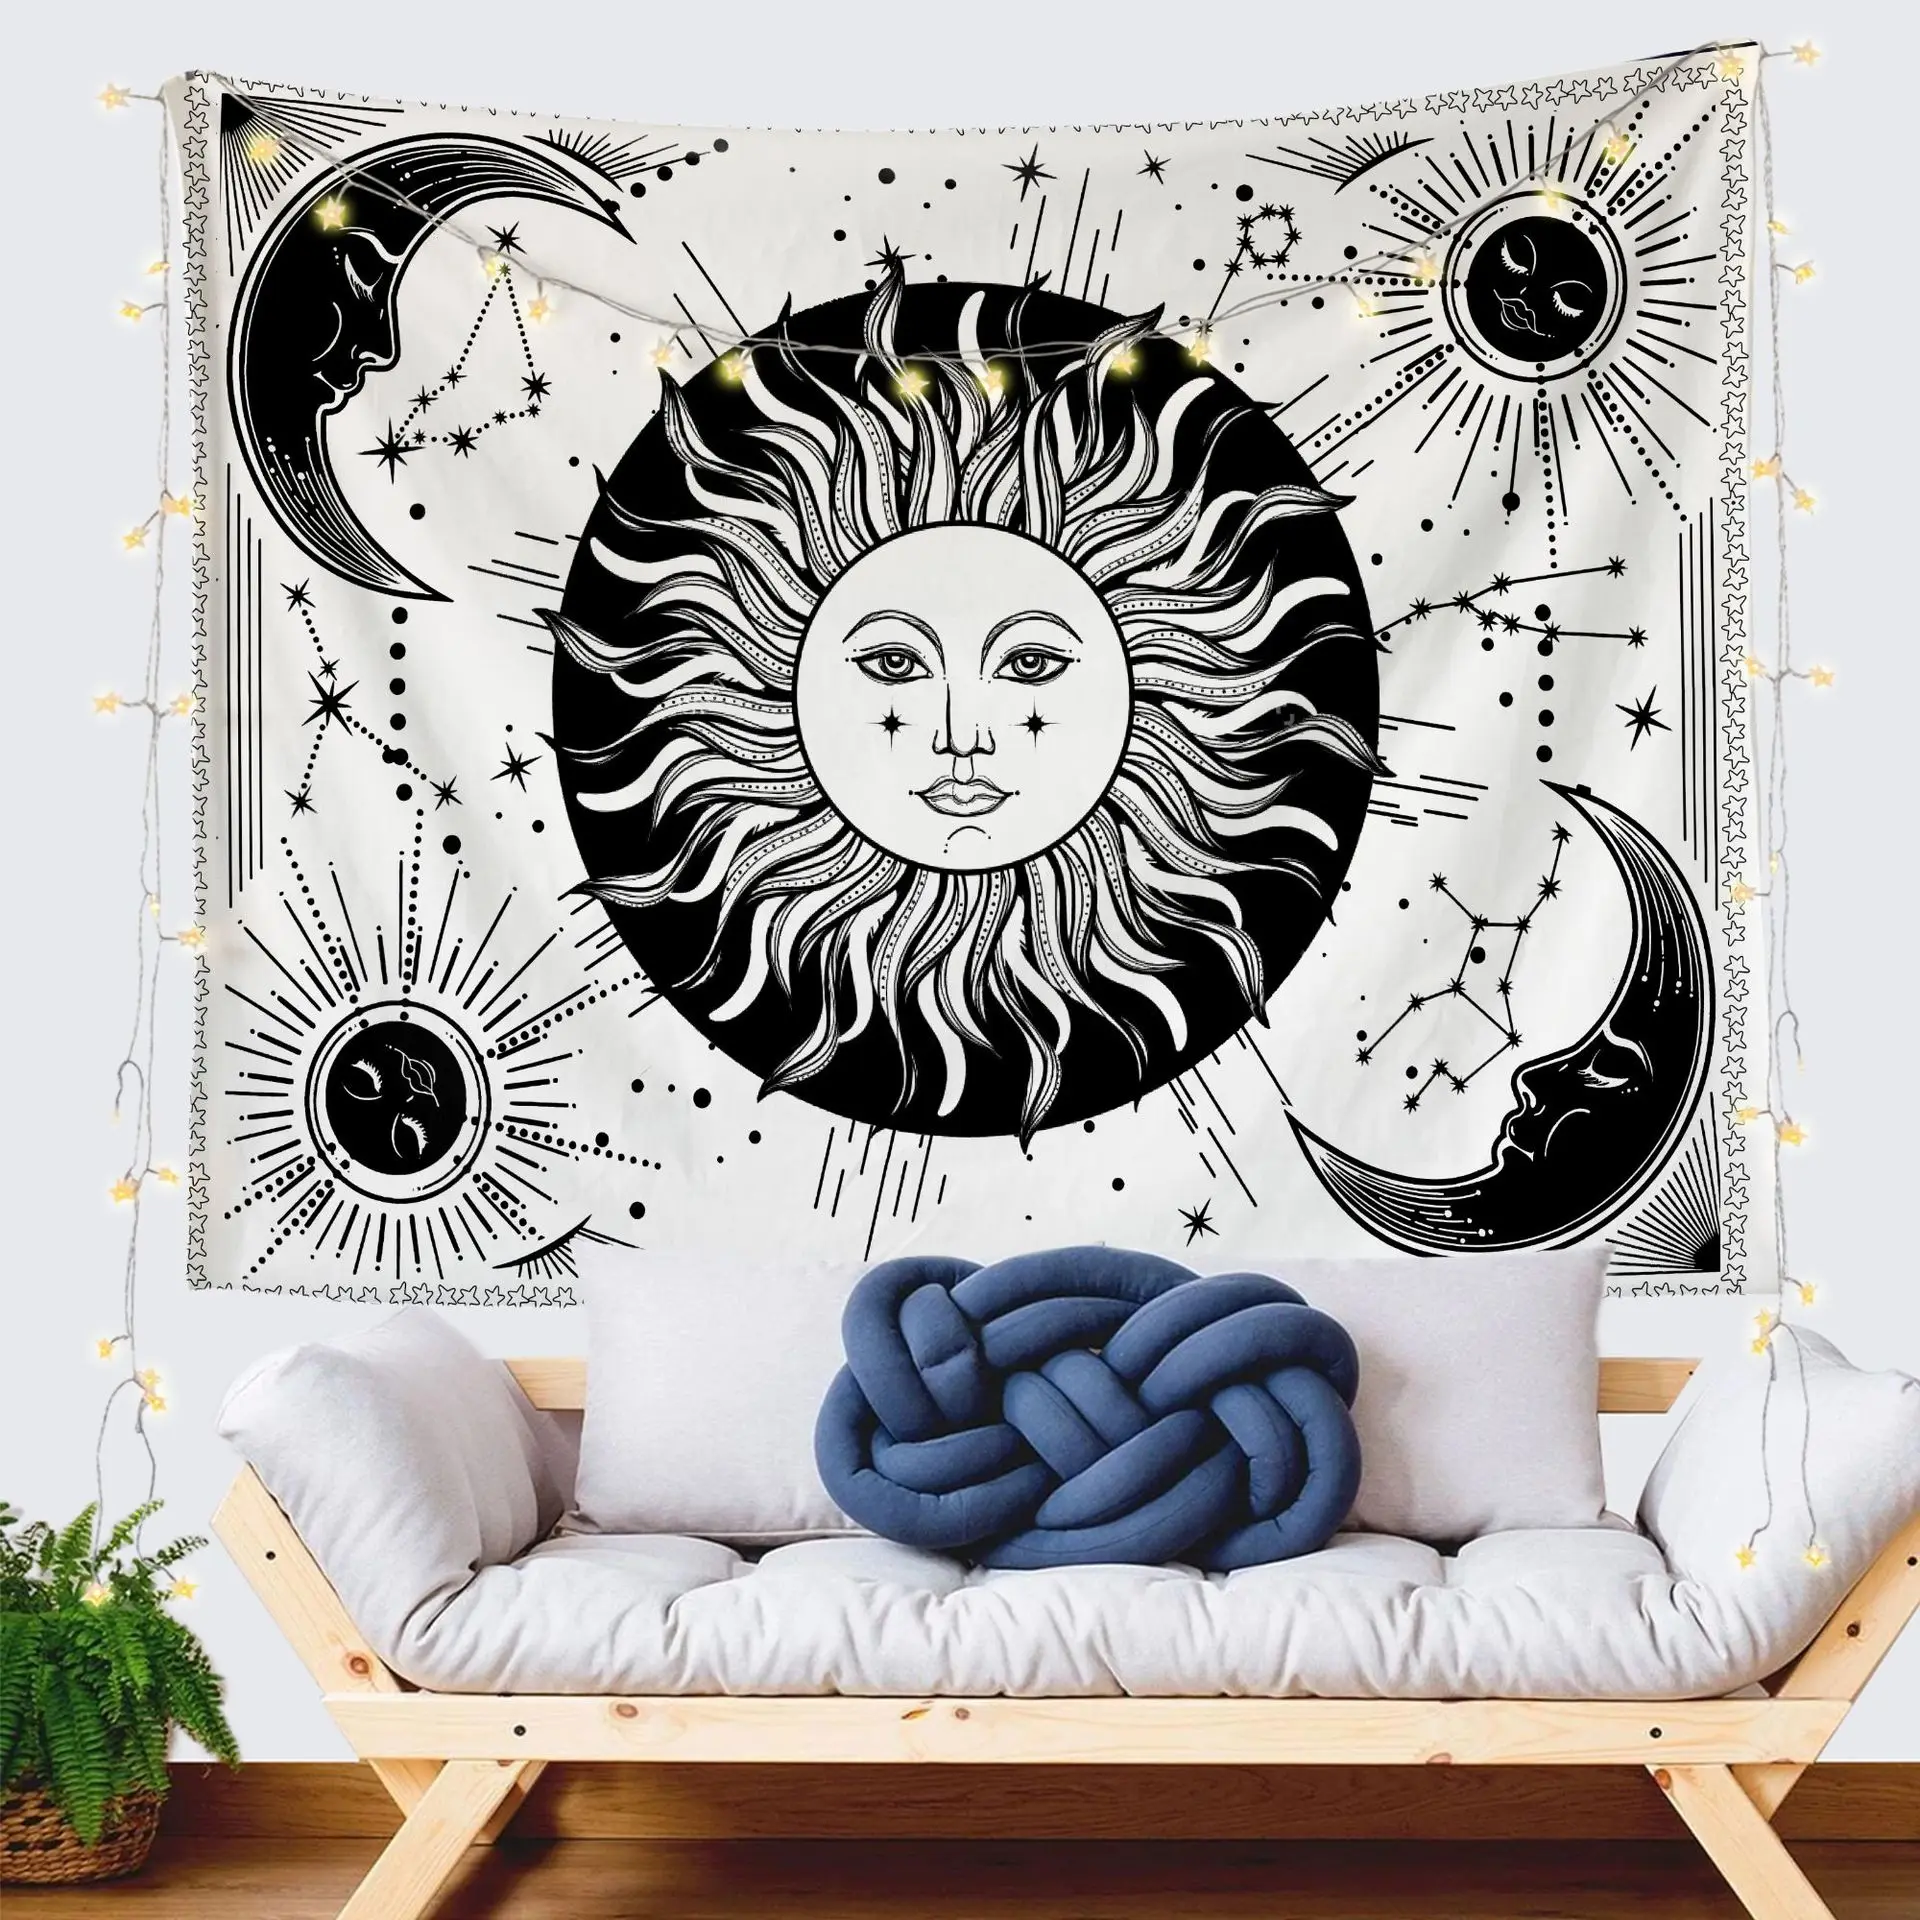 
Custom Tarot Tapestry Wall Hanging Astrology Divination Bedspread Matwitchcraft White Black Sun Moon Tapestry 